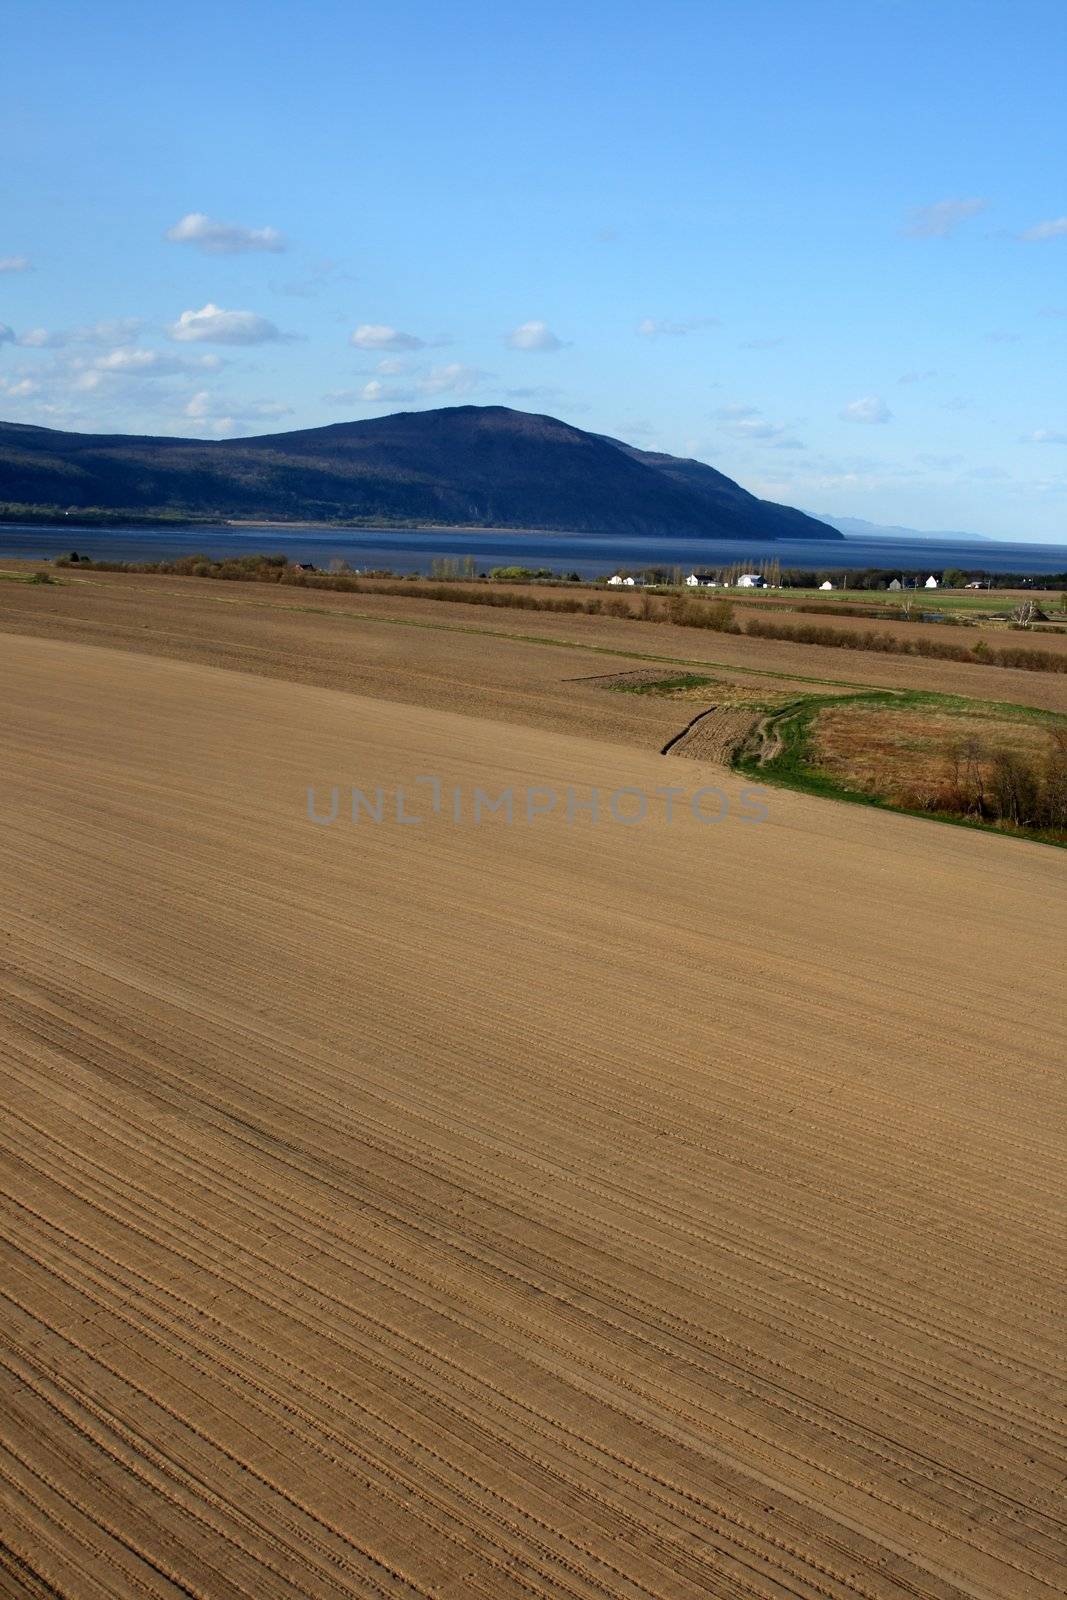 Rural landscape. Ploughed land ready for cultivation.